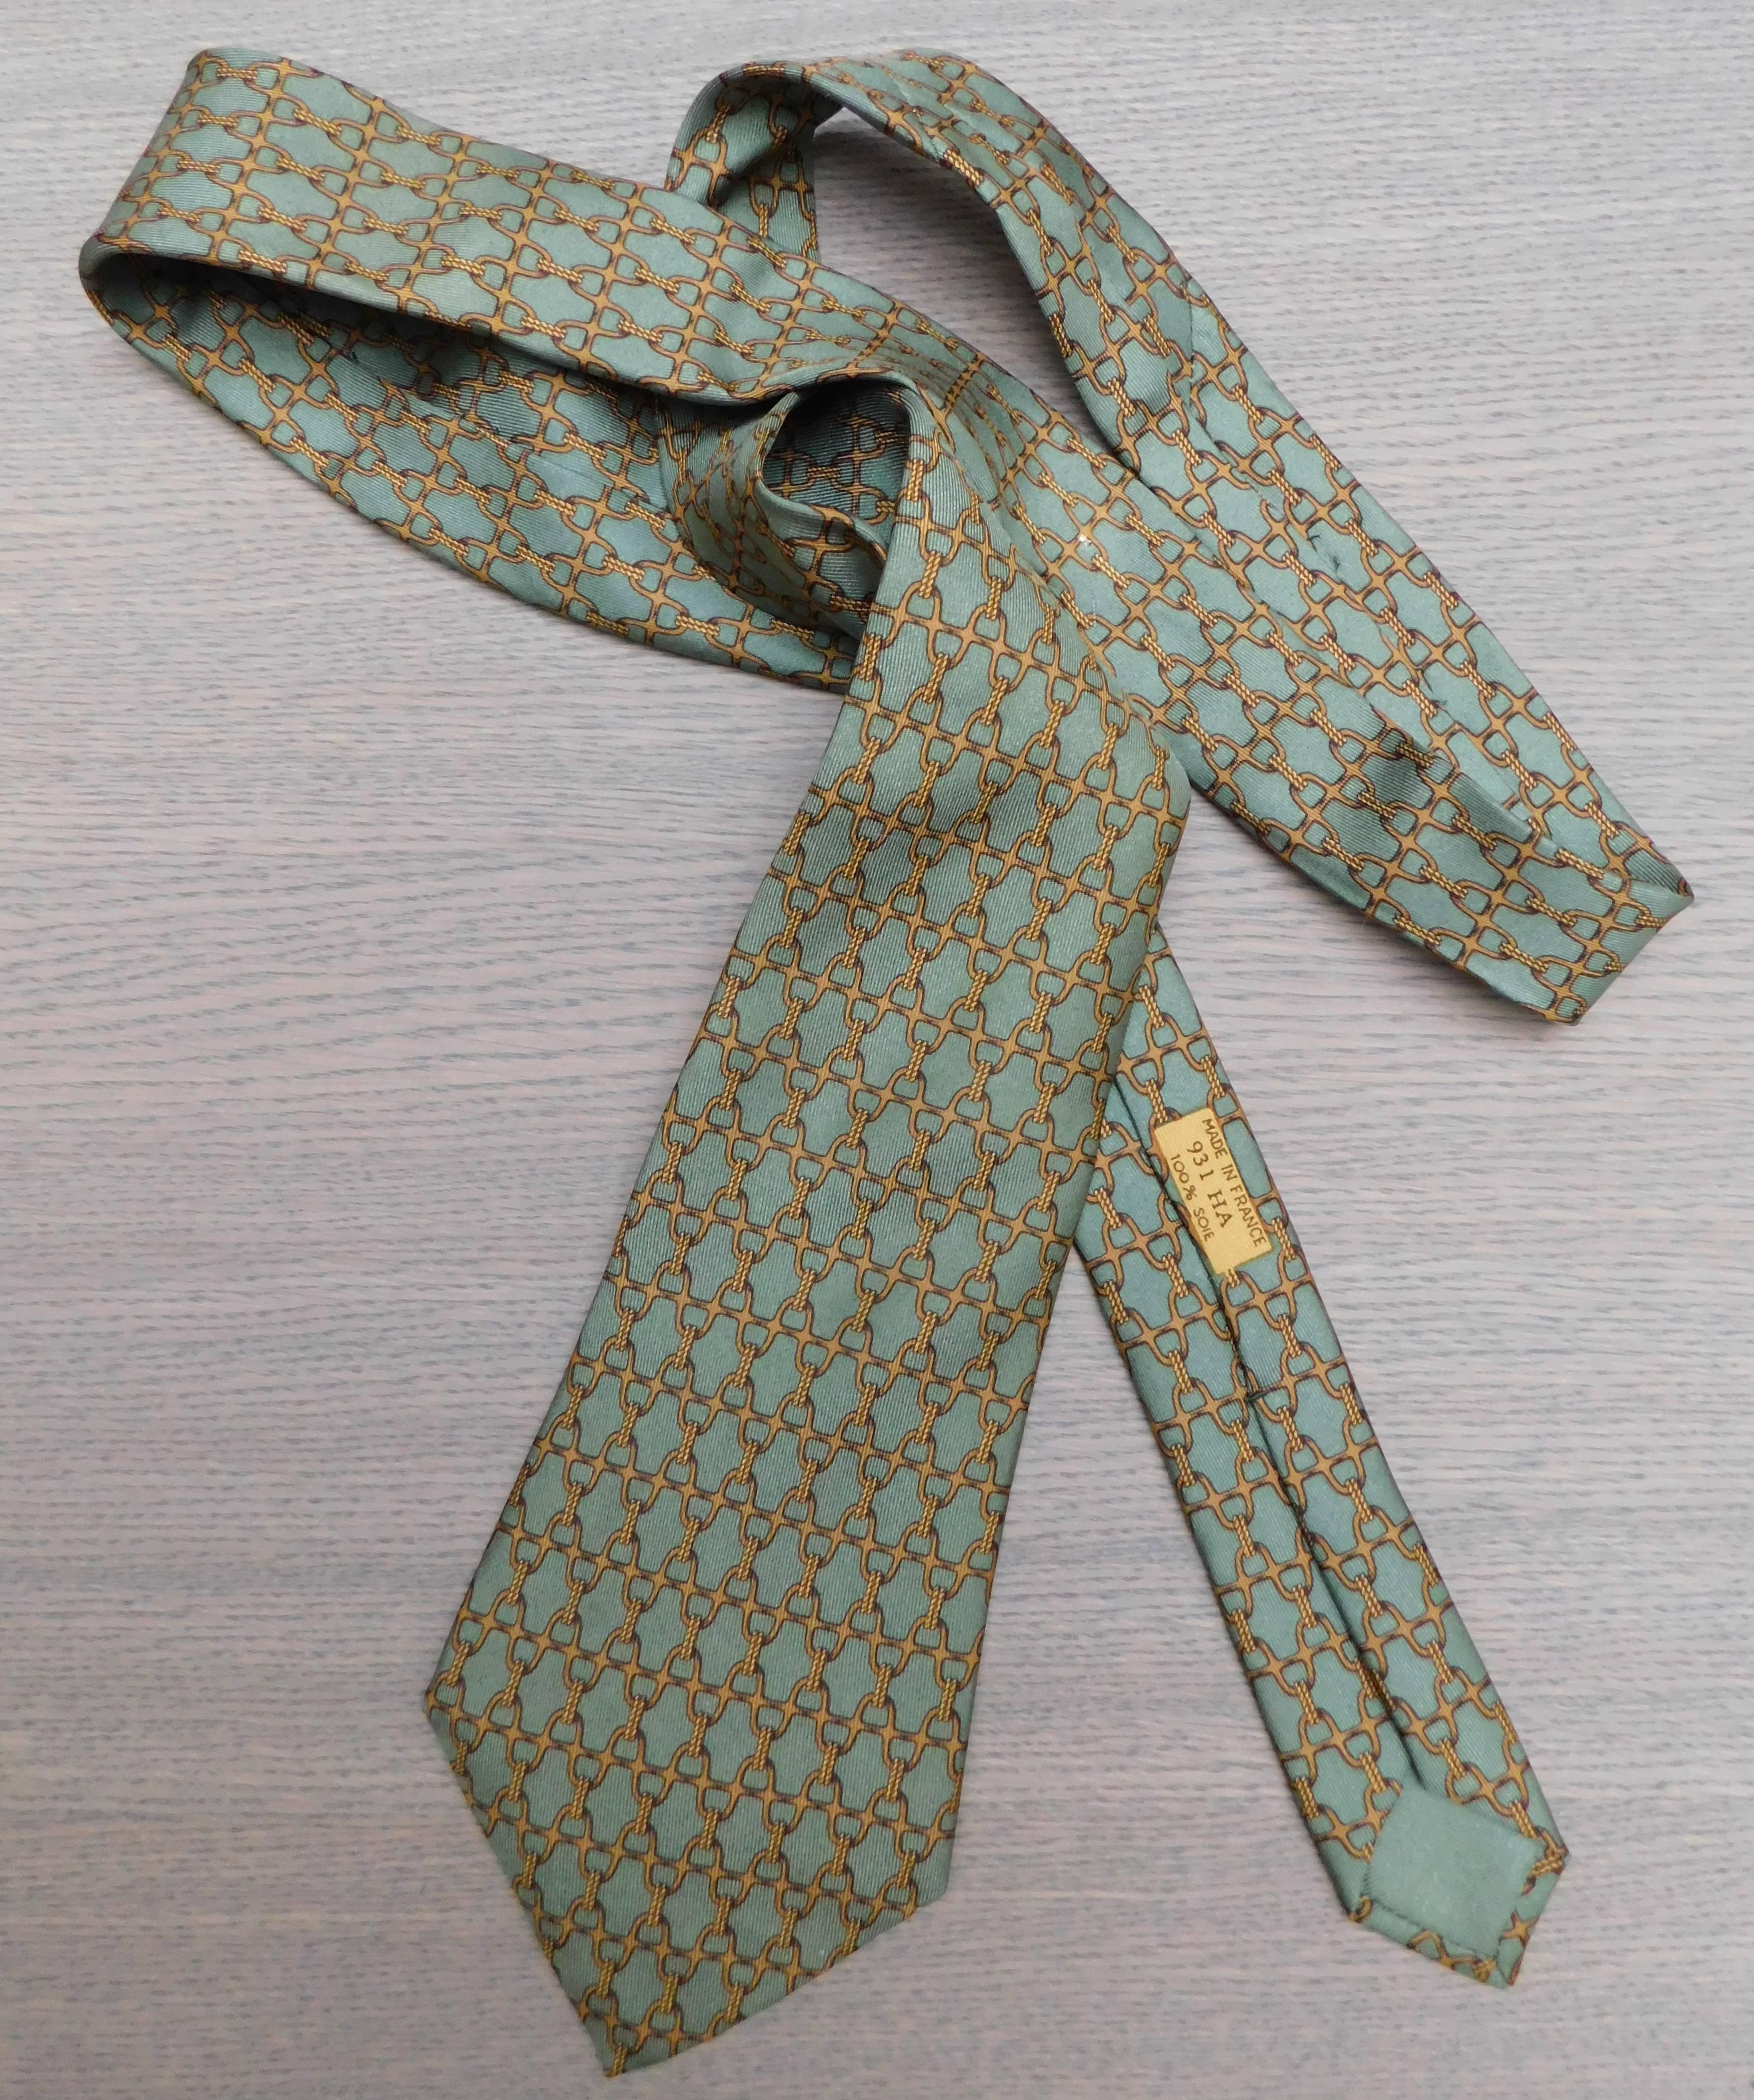 Hermes vintage silk tie in one of the most desirable Hermes equestrian patterns. The elegant combination of olive green and gold is perfect for every season and occasion.
the width at the widest point is 9cm.